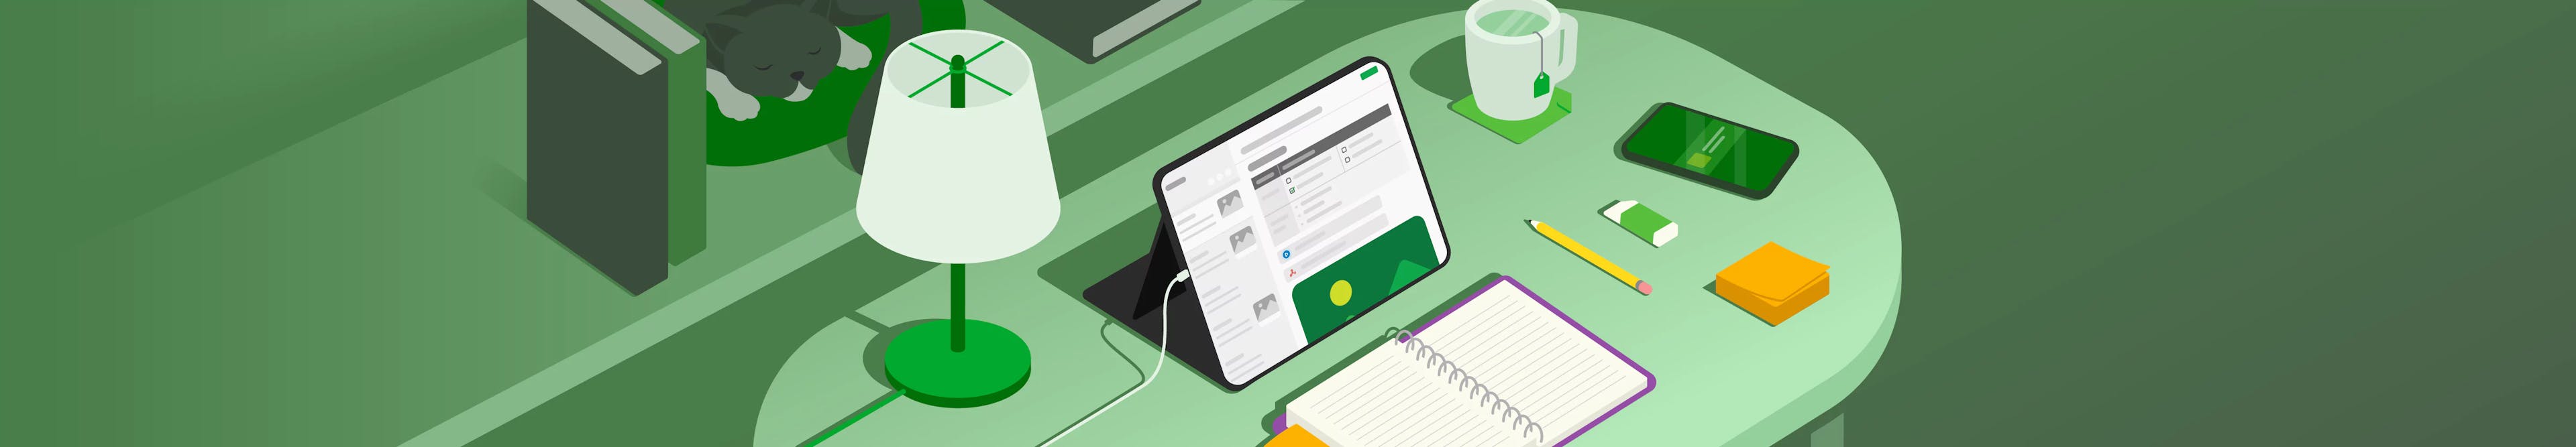 Illustration of many devices using Evernote